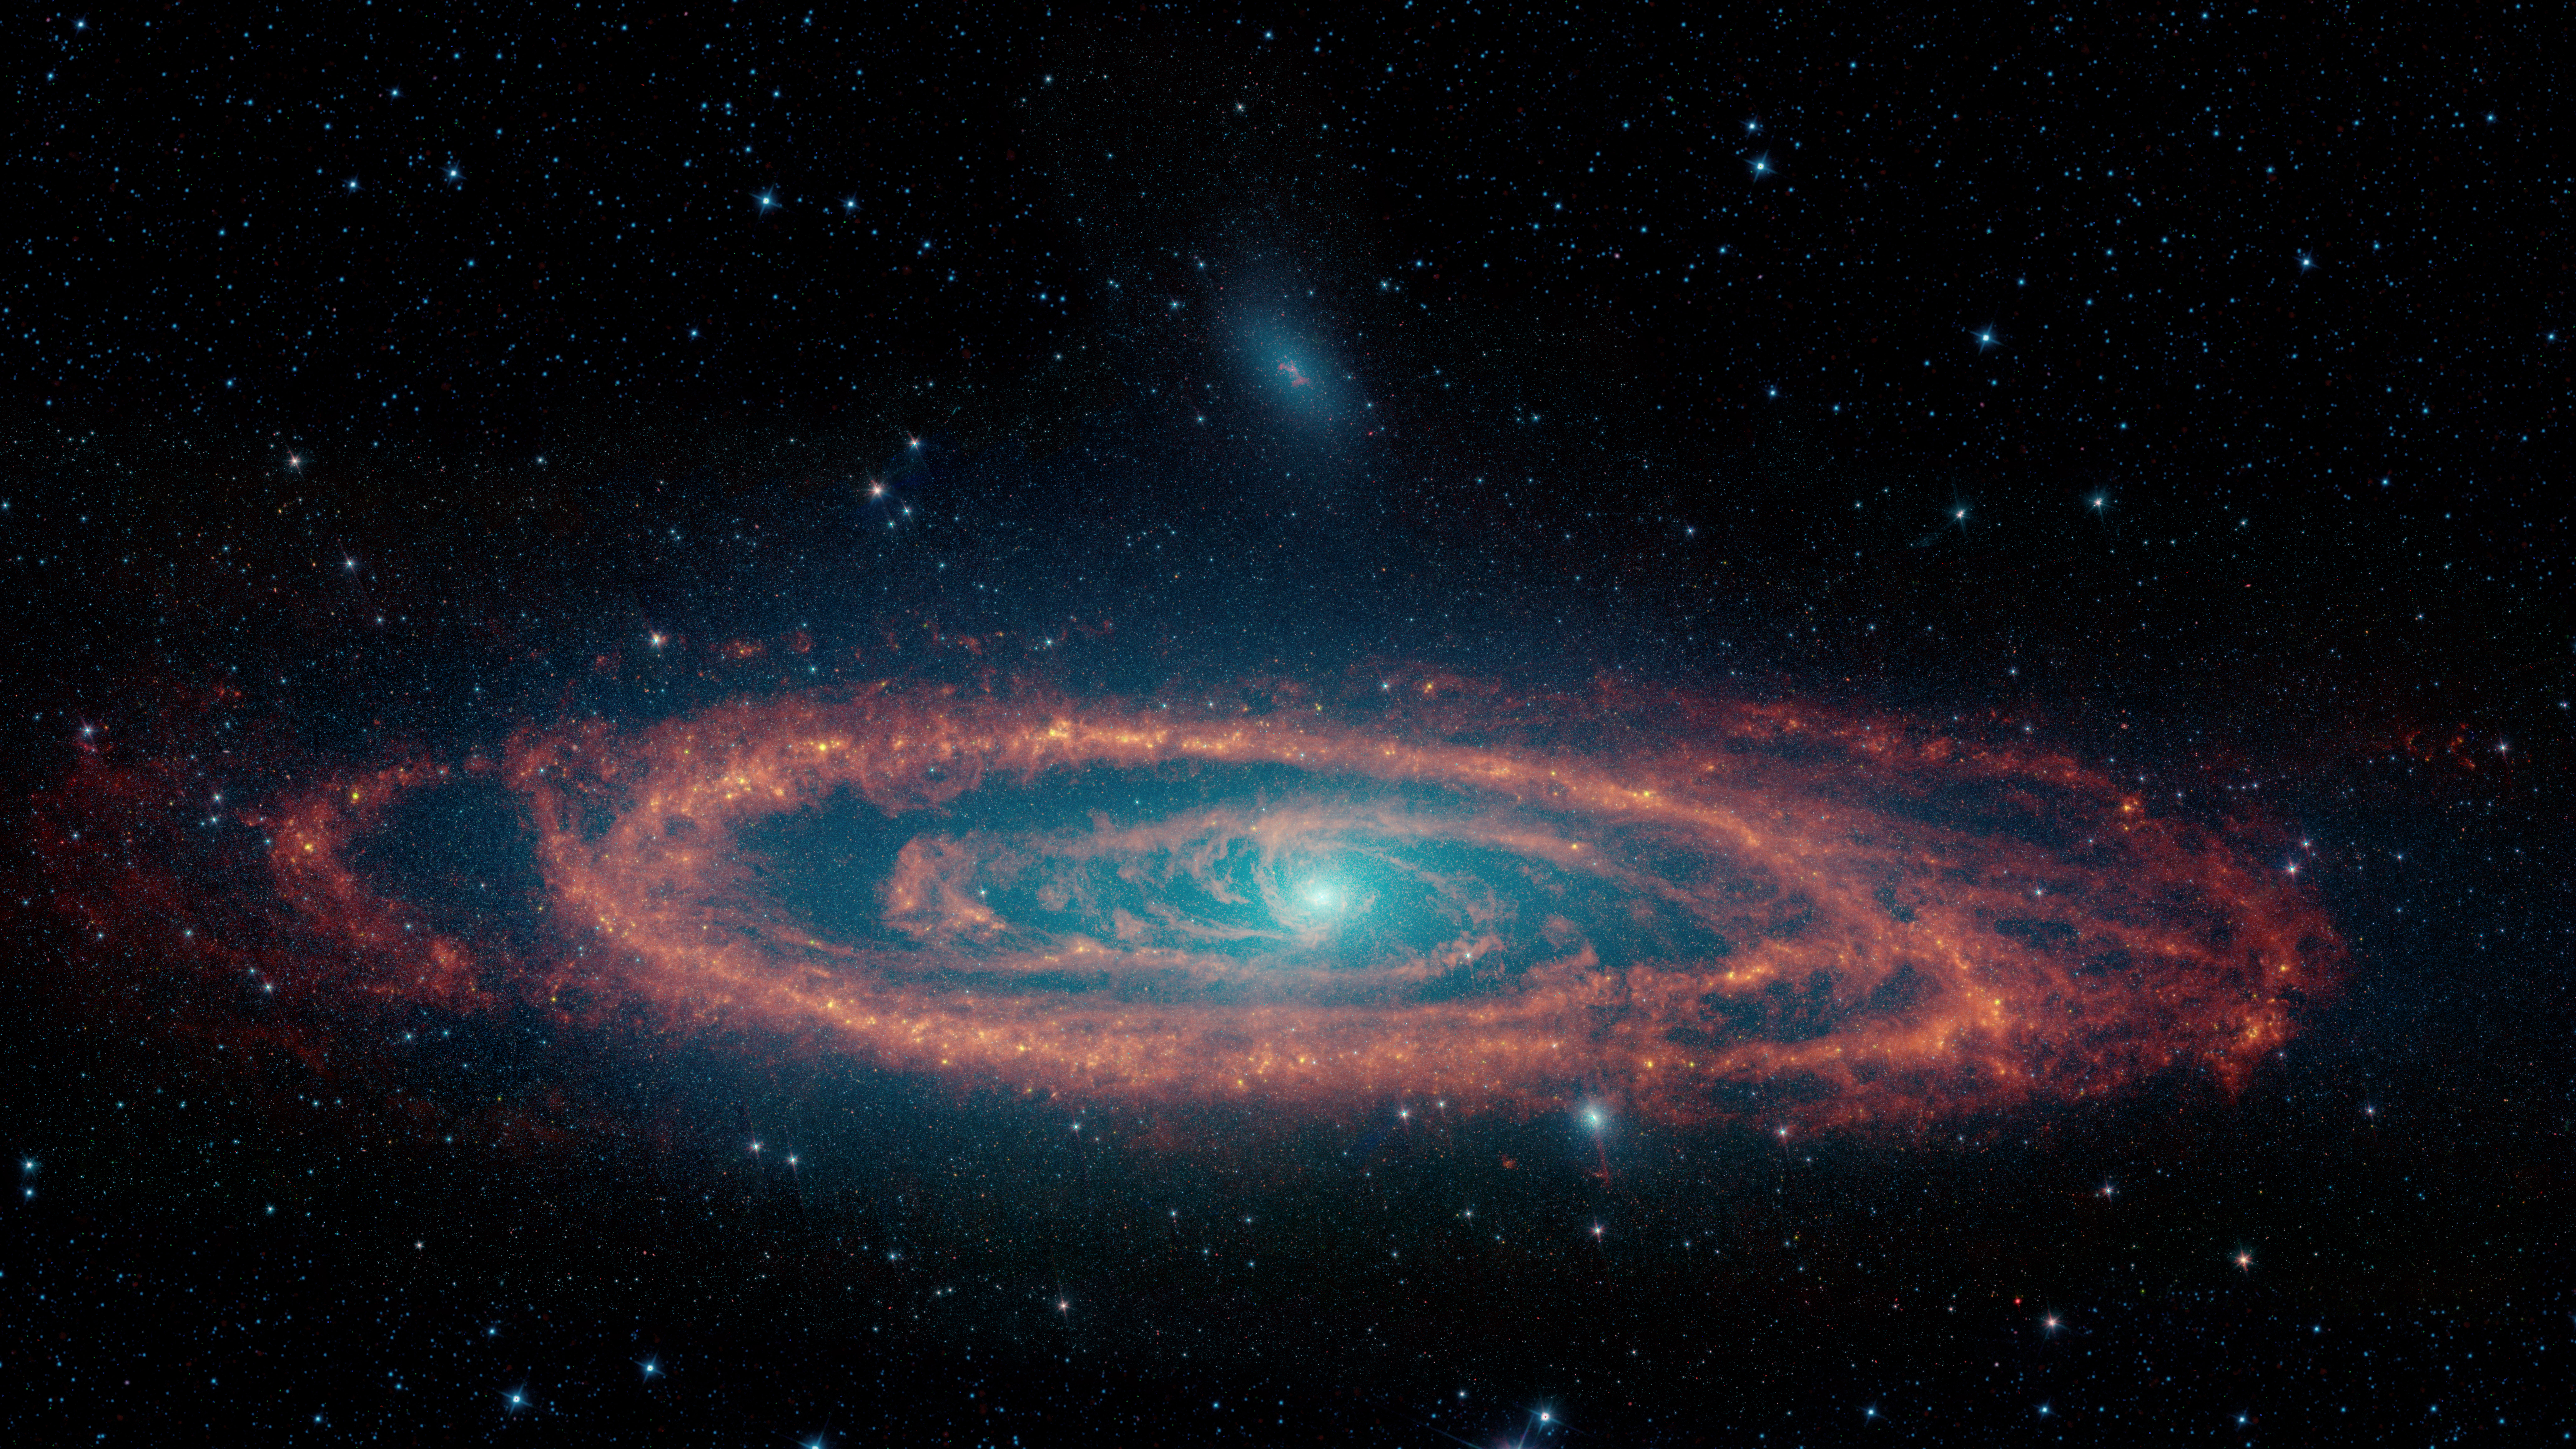 This image of the Andromeda galaxy uses data from NASA’s retired Spitzer Space Telescope. Multiple wavelengths are shown, revealing stars (in blue and cyan), dust (red), and areas of star formation. Dust swirls around like water going down a drain, as the black hole at the heart of the Andromeda consumes it.